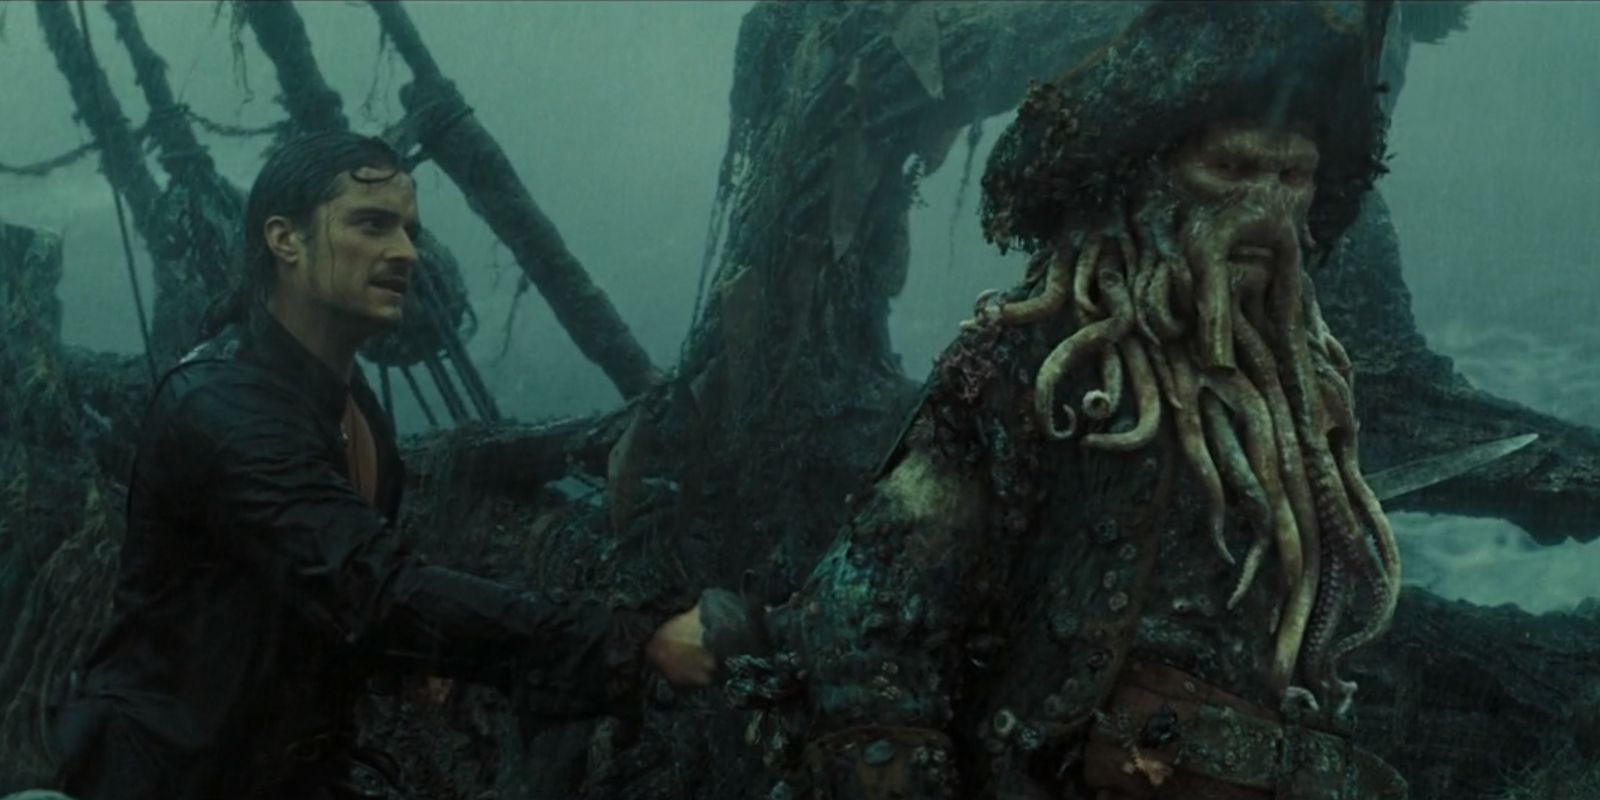 Does Hollywood Really Need Another Pirates of the Caribbean